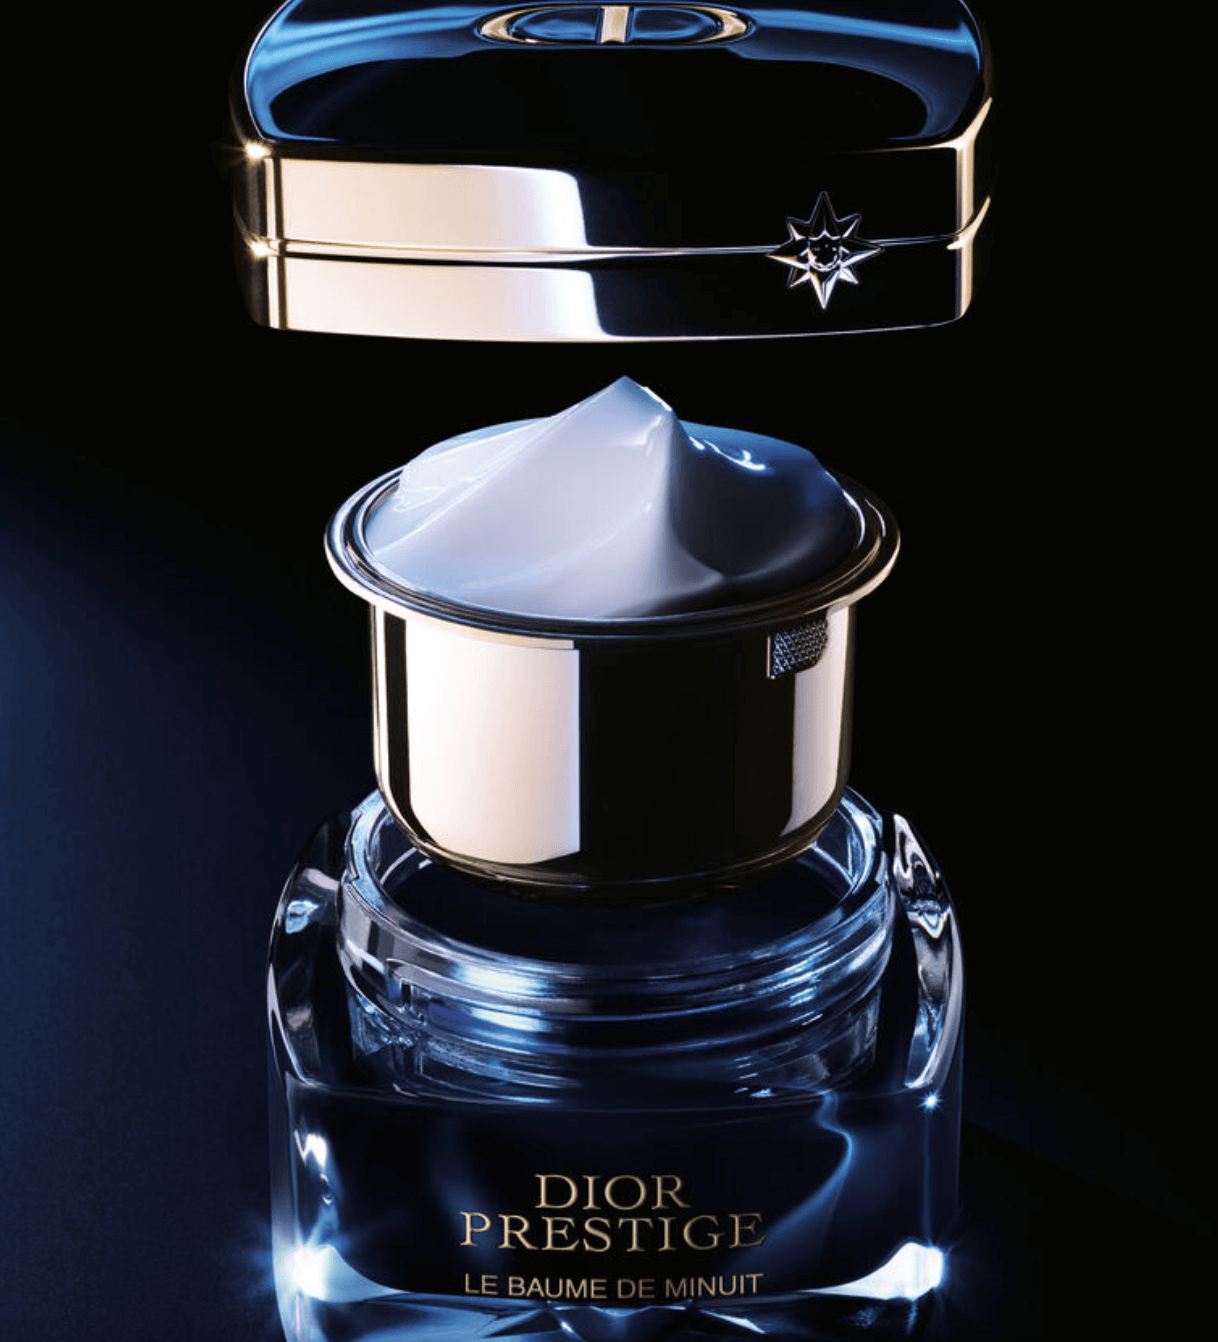 Following two decades of research, Dior has unveiled the secrets of this potency, unveiling a unique nighttime molecular profile that shields against nocturnal aggressors.